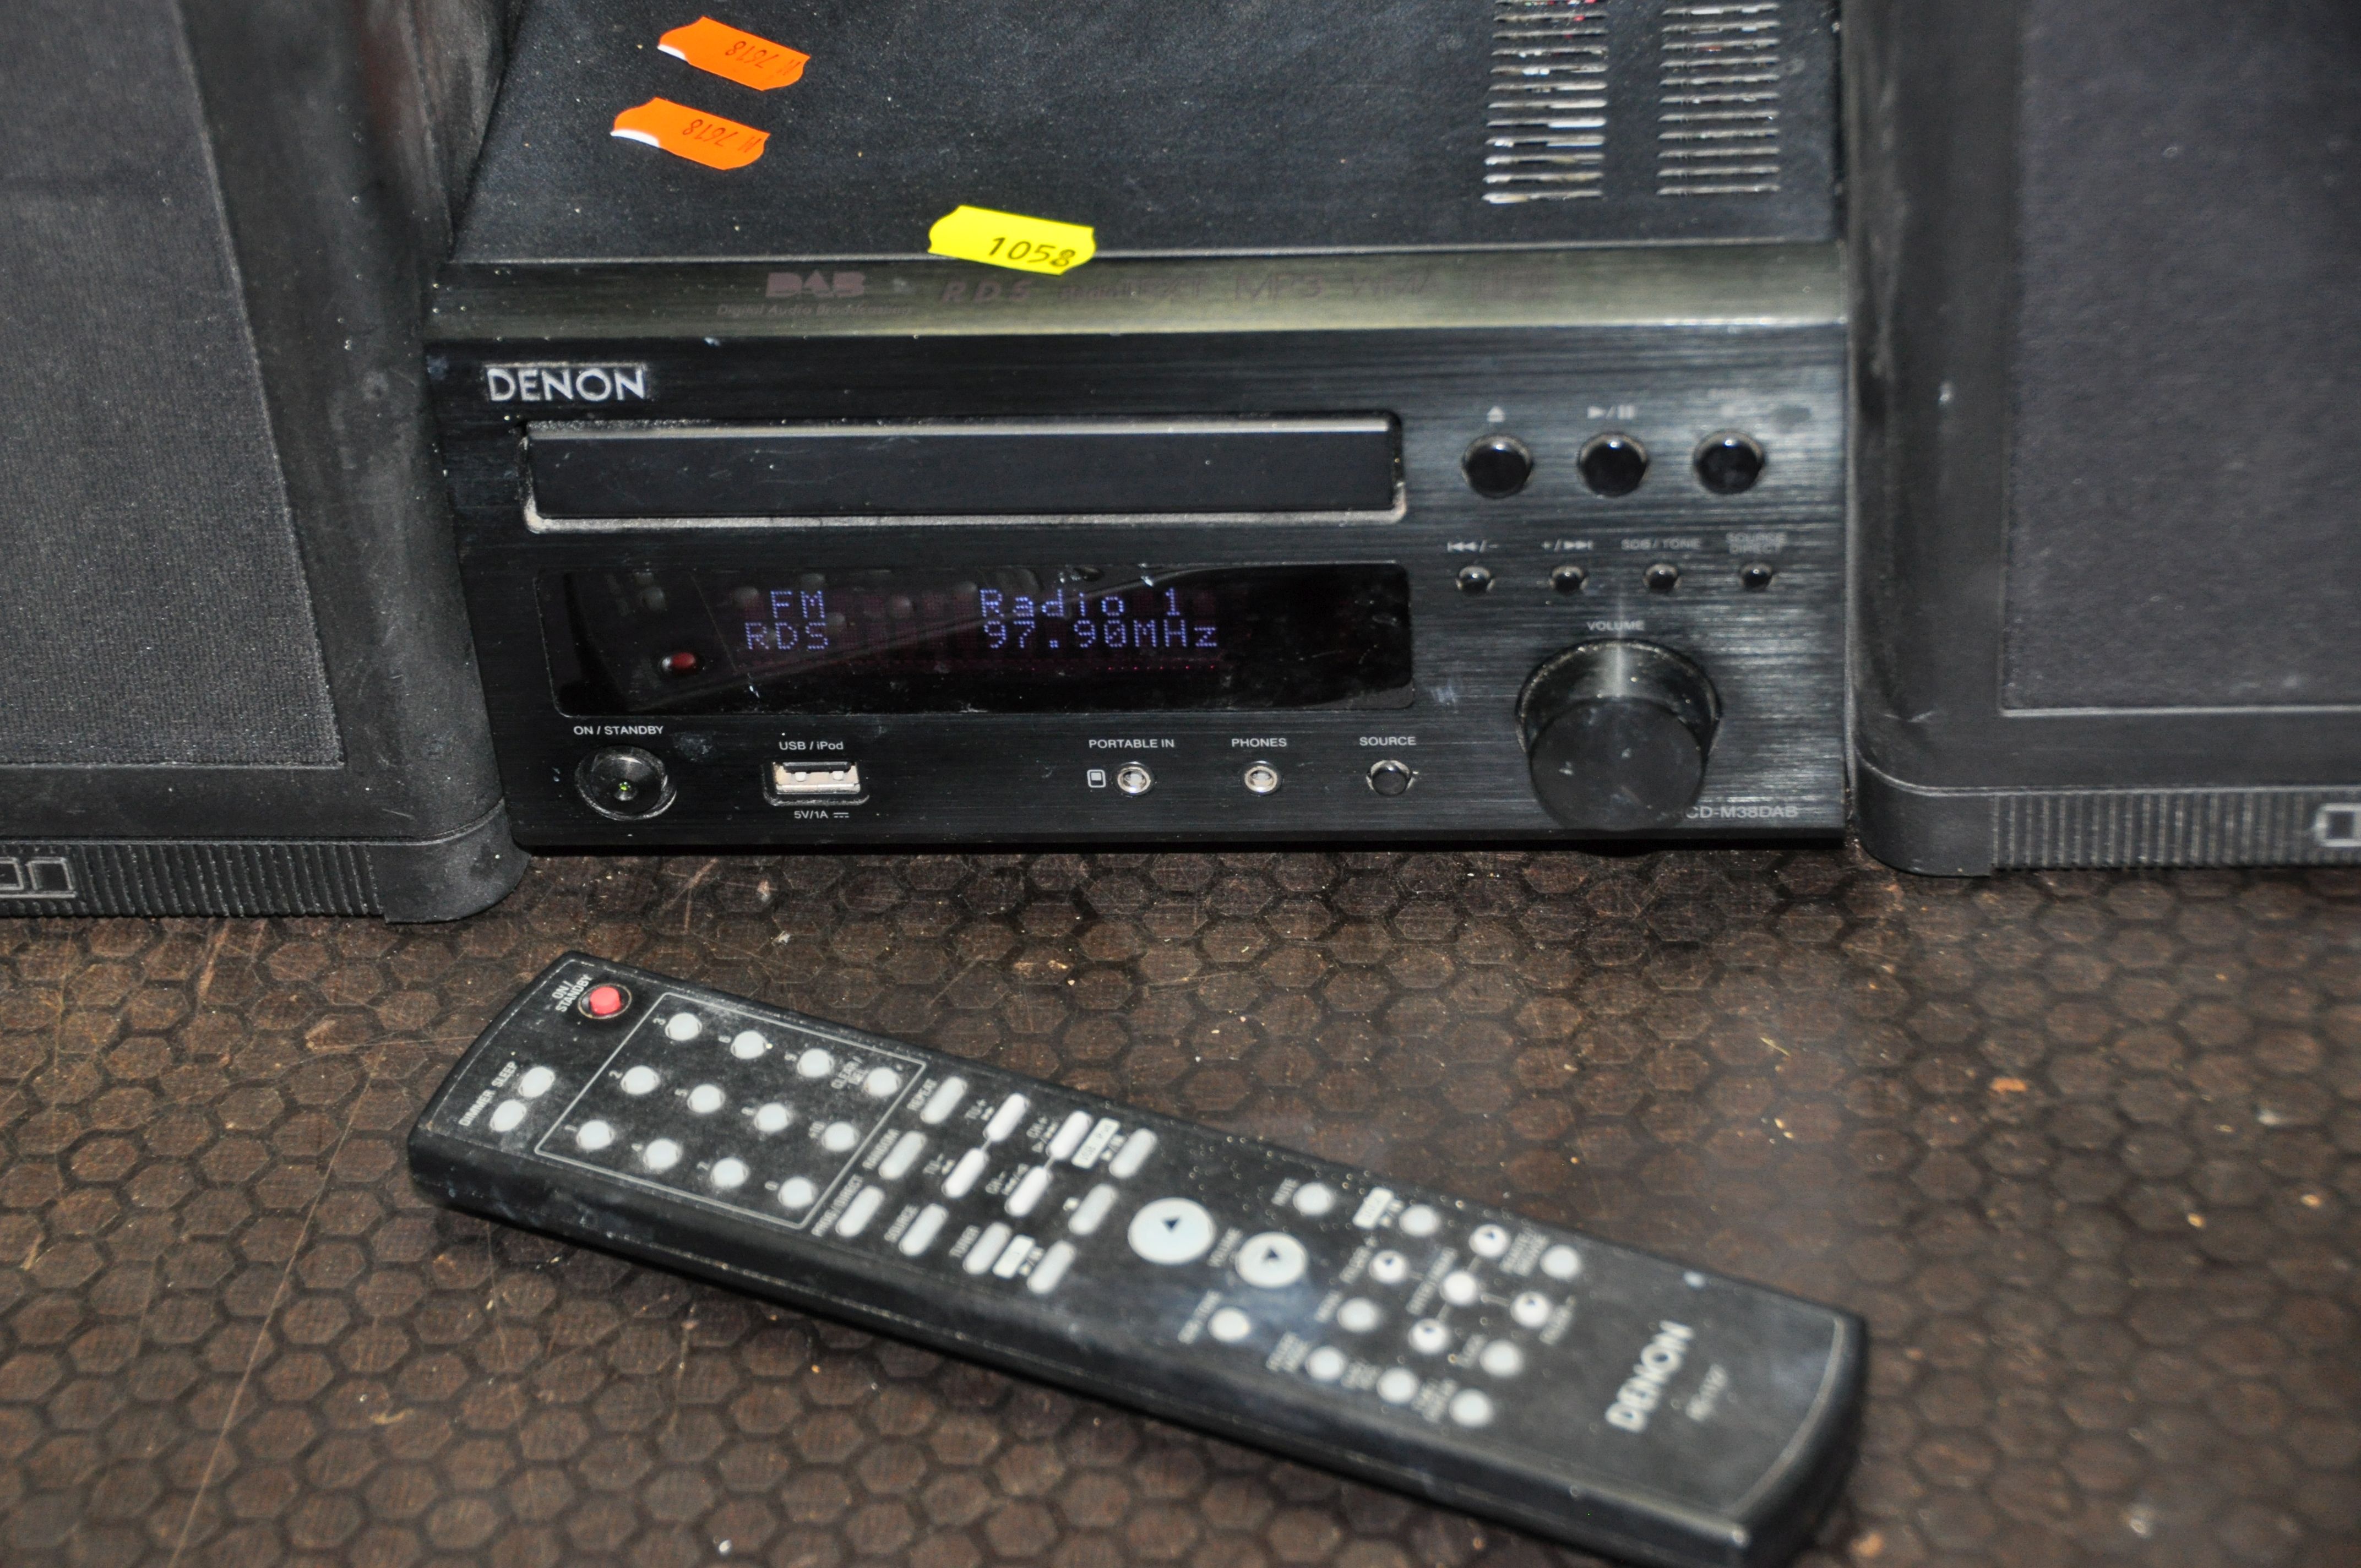 A DENON RCD-M38DAB CD/DAB RECEIVER AMPLIFIER with remote and a pair of Mission 760i speakers (PAT - Image 2 of 2